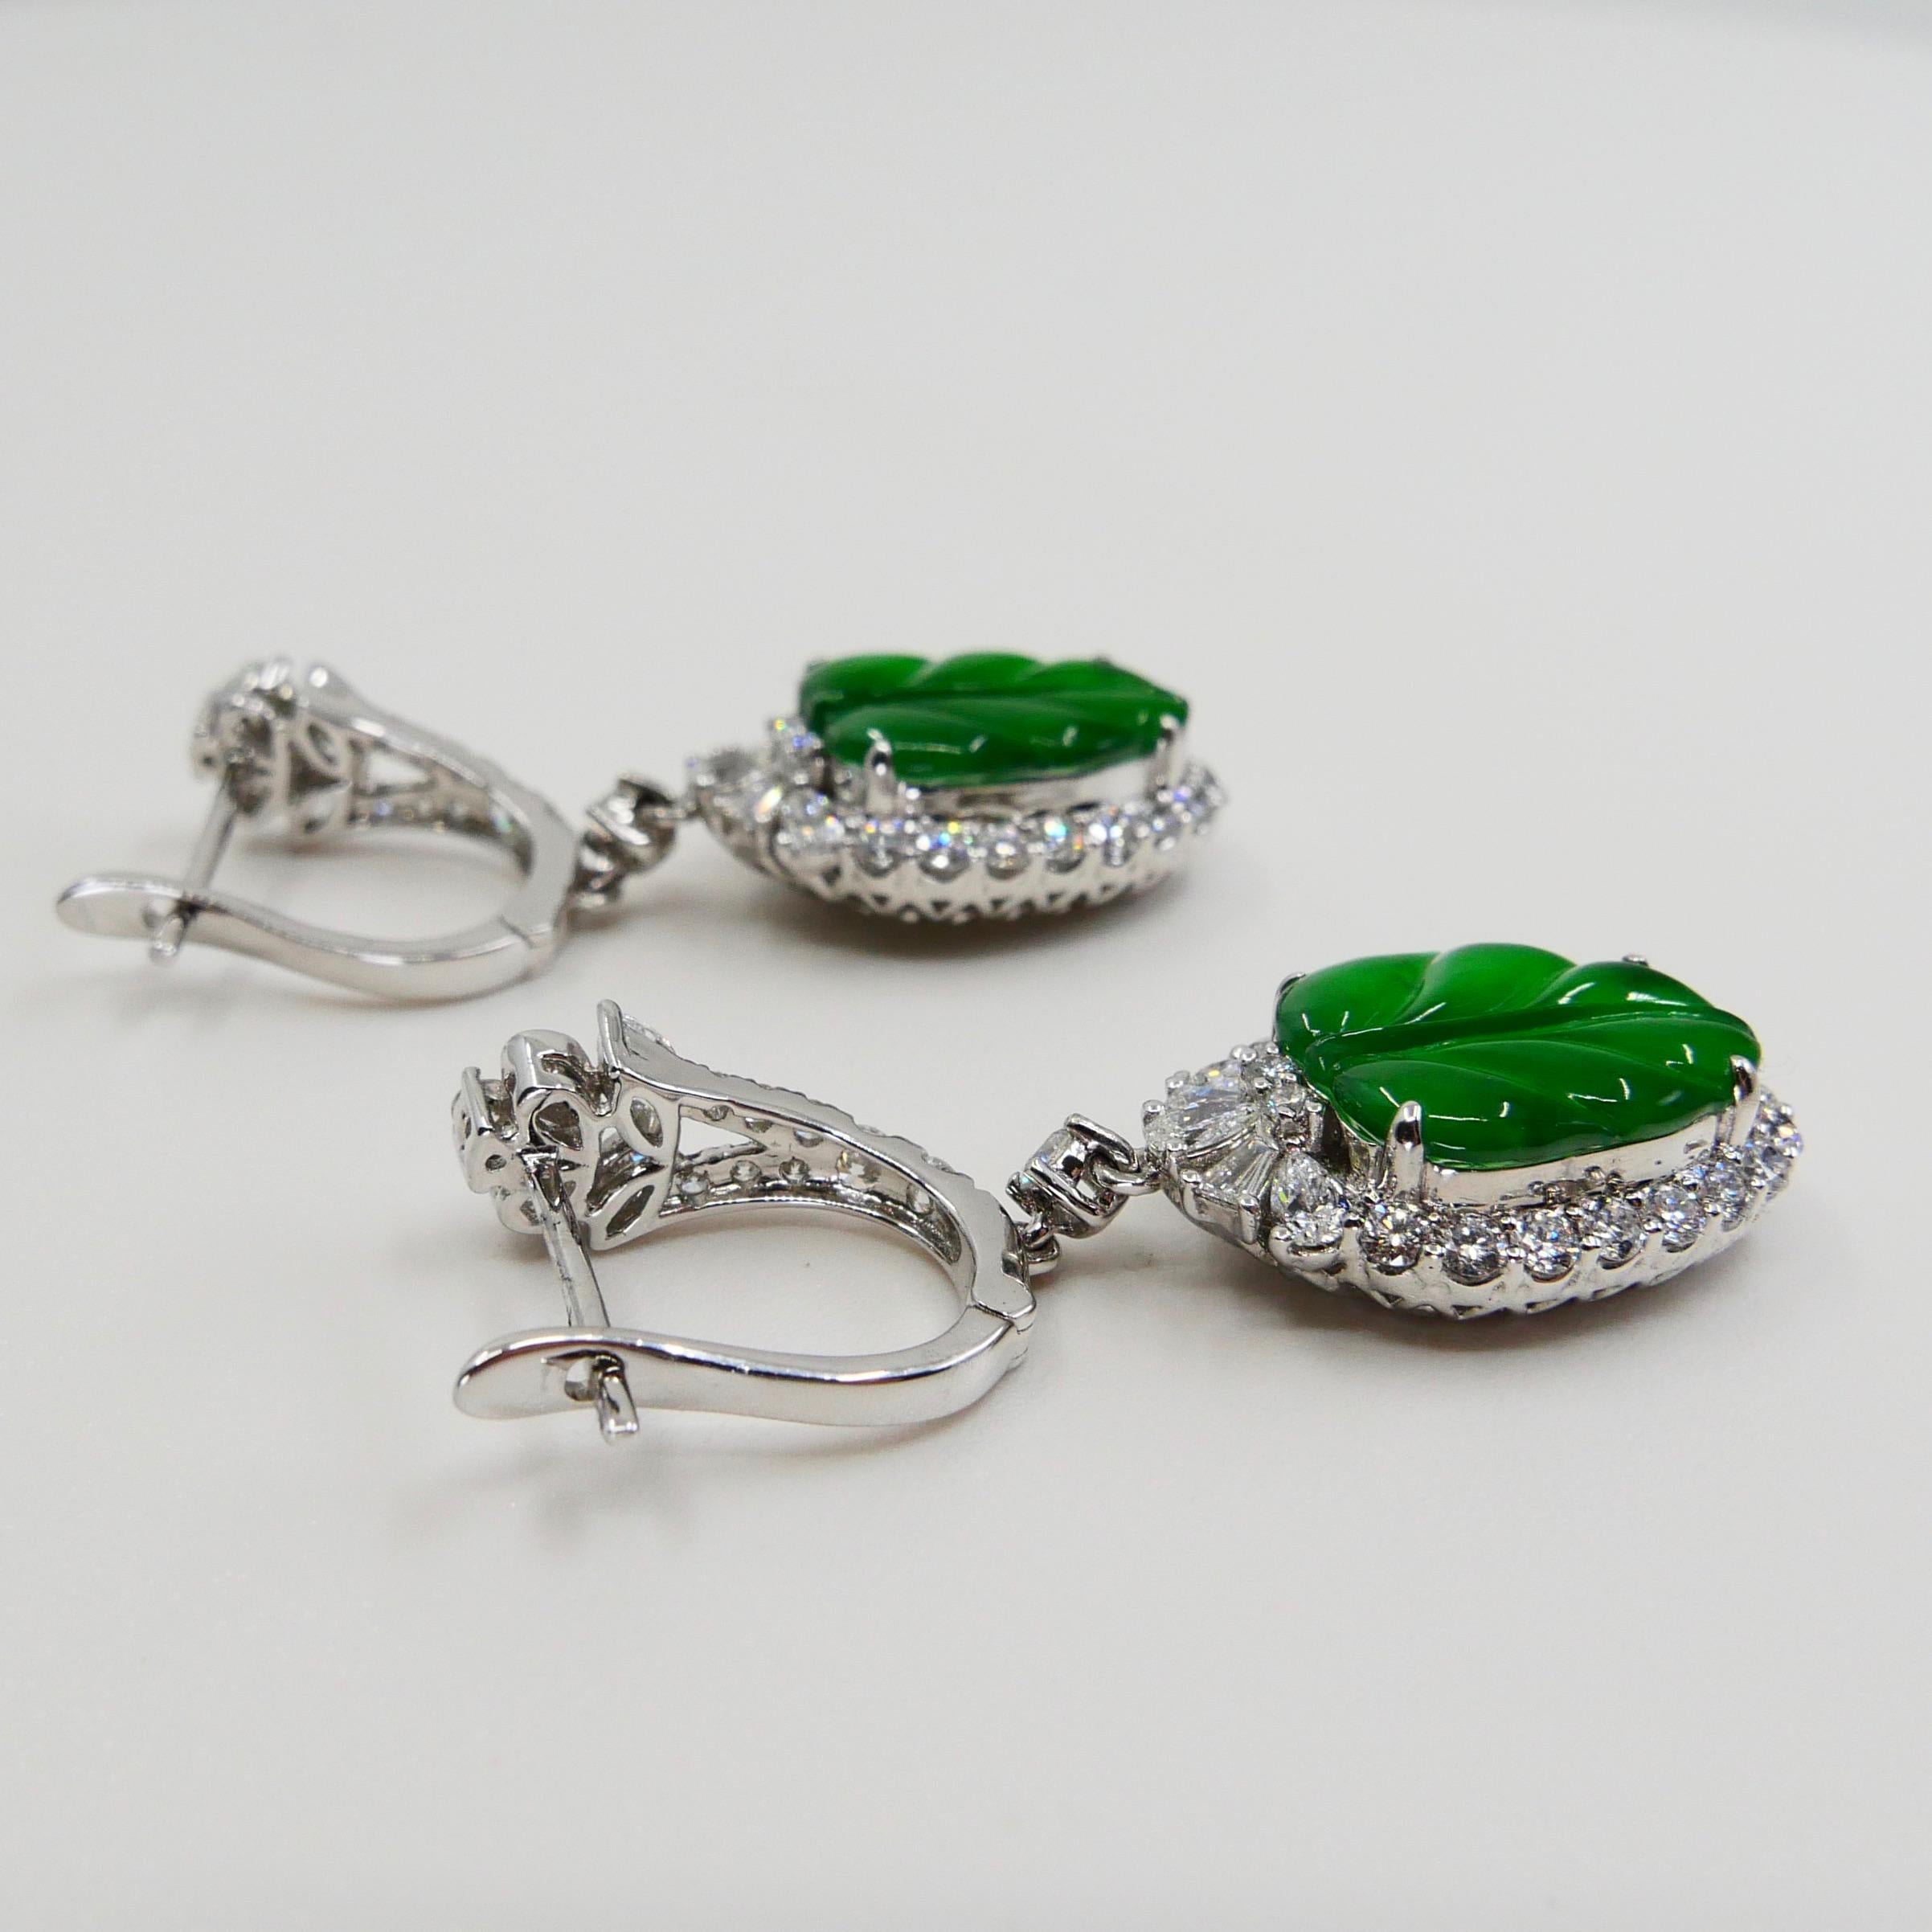 Certified Icy Apple Green Jade and Diamond Earrings, Almost Imperial Green 5